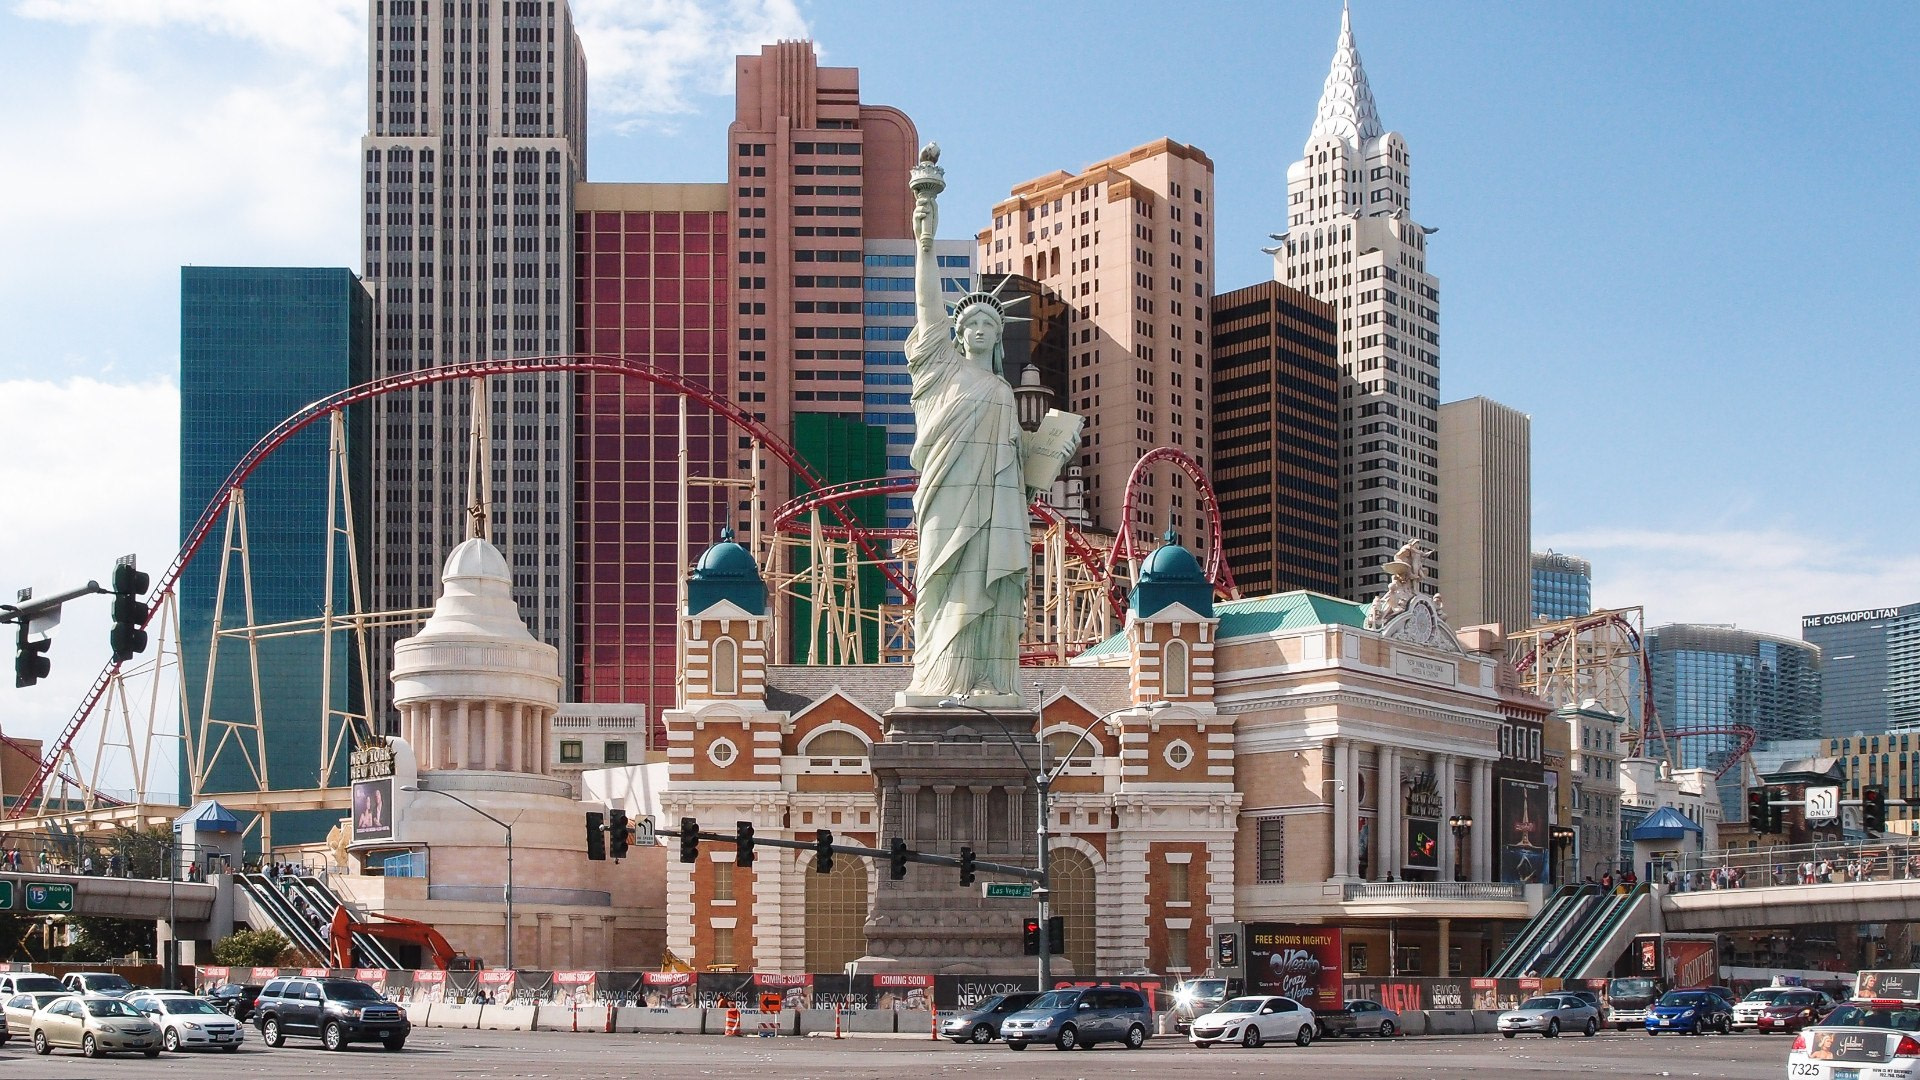 New York New York Hotel & Casino in Las Vegas: Find Hotel Reviews, Rooms,  and Prices on